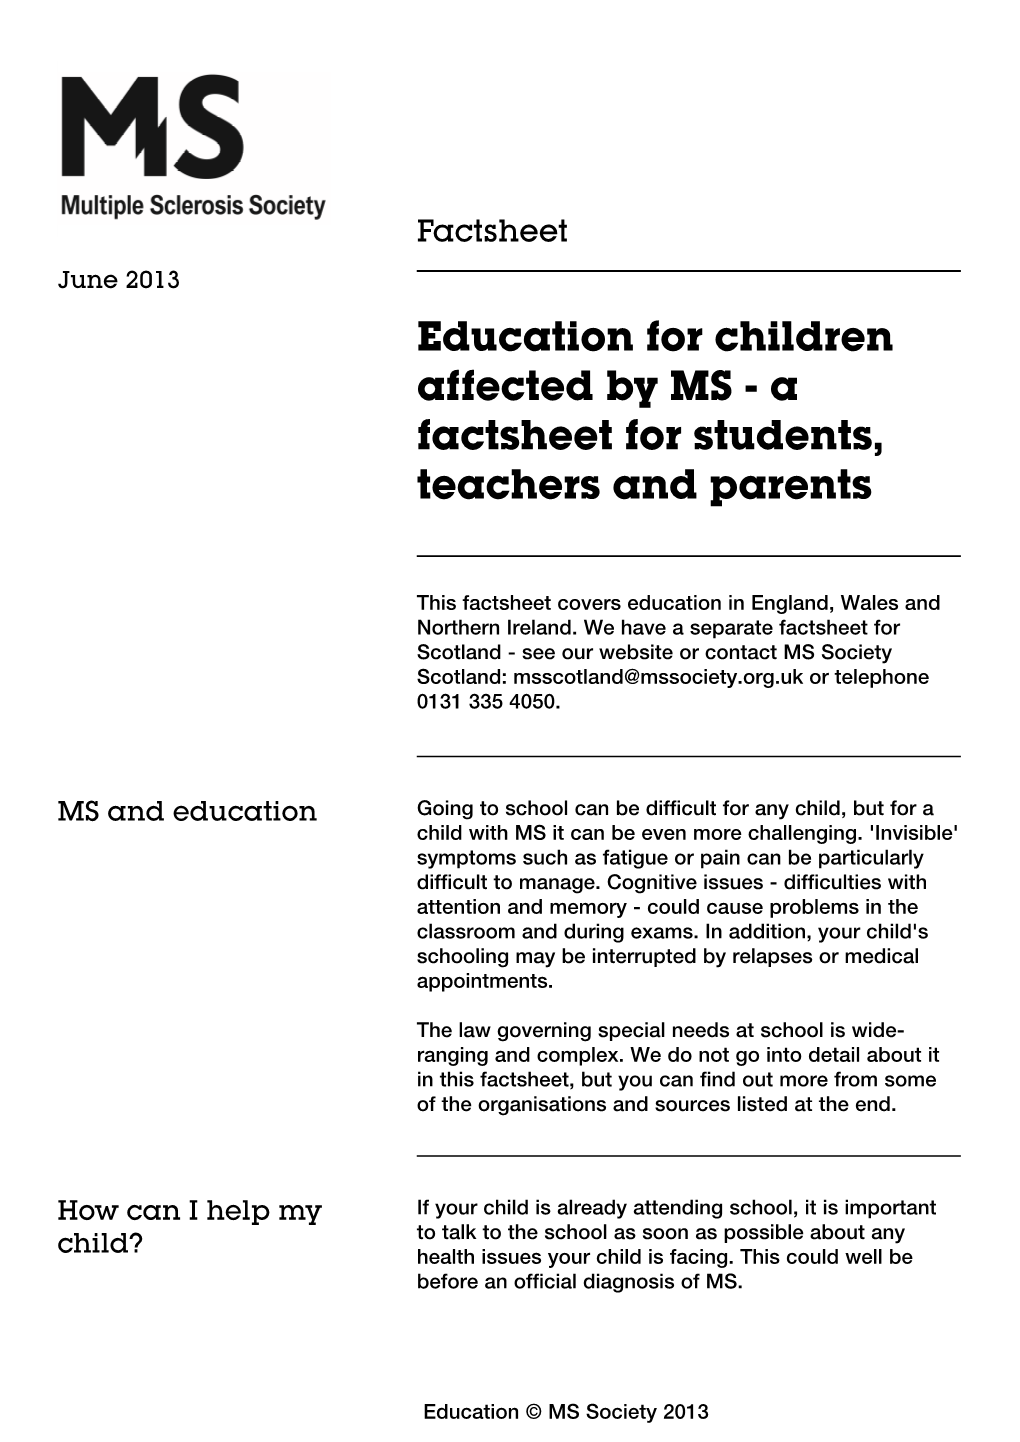 Education for Children Affected by MS - a Factsheet for Students, Teachers and Parents